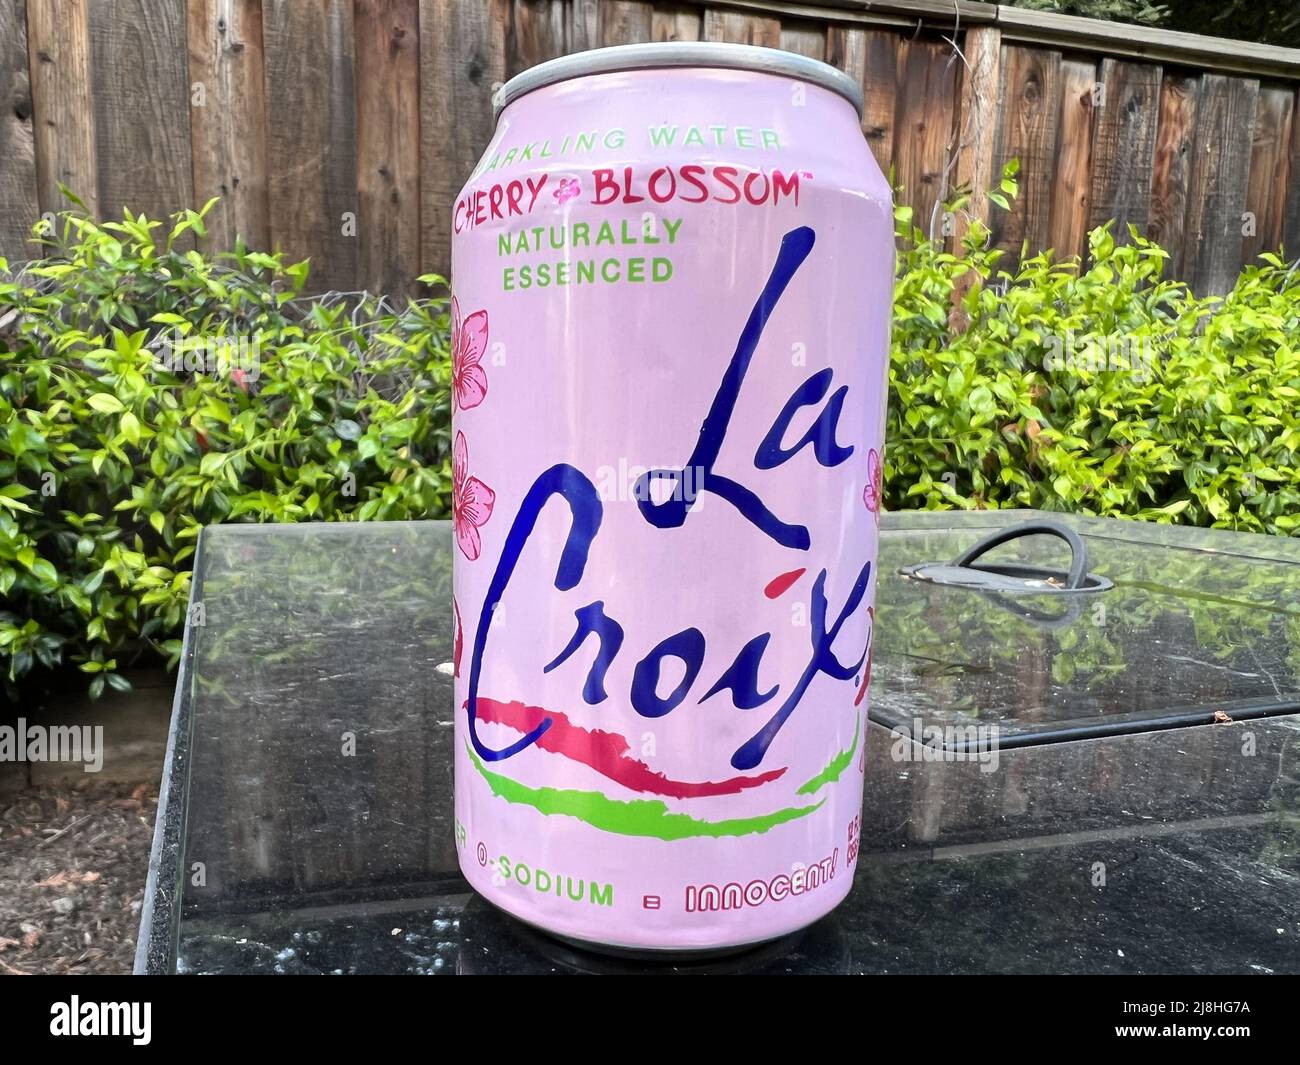 Close-up of can of LaCroix Cherry Blossom flavored sparkling water, Lafayette, California, April 19, 2022. Photo courtesy Sftm. Stock Photo